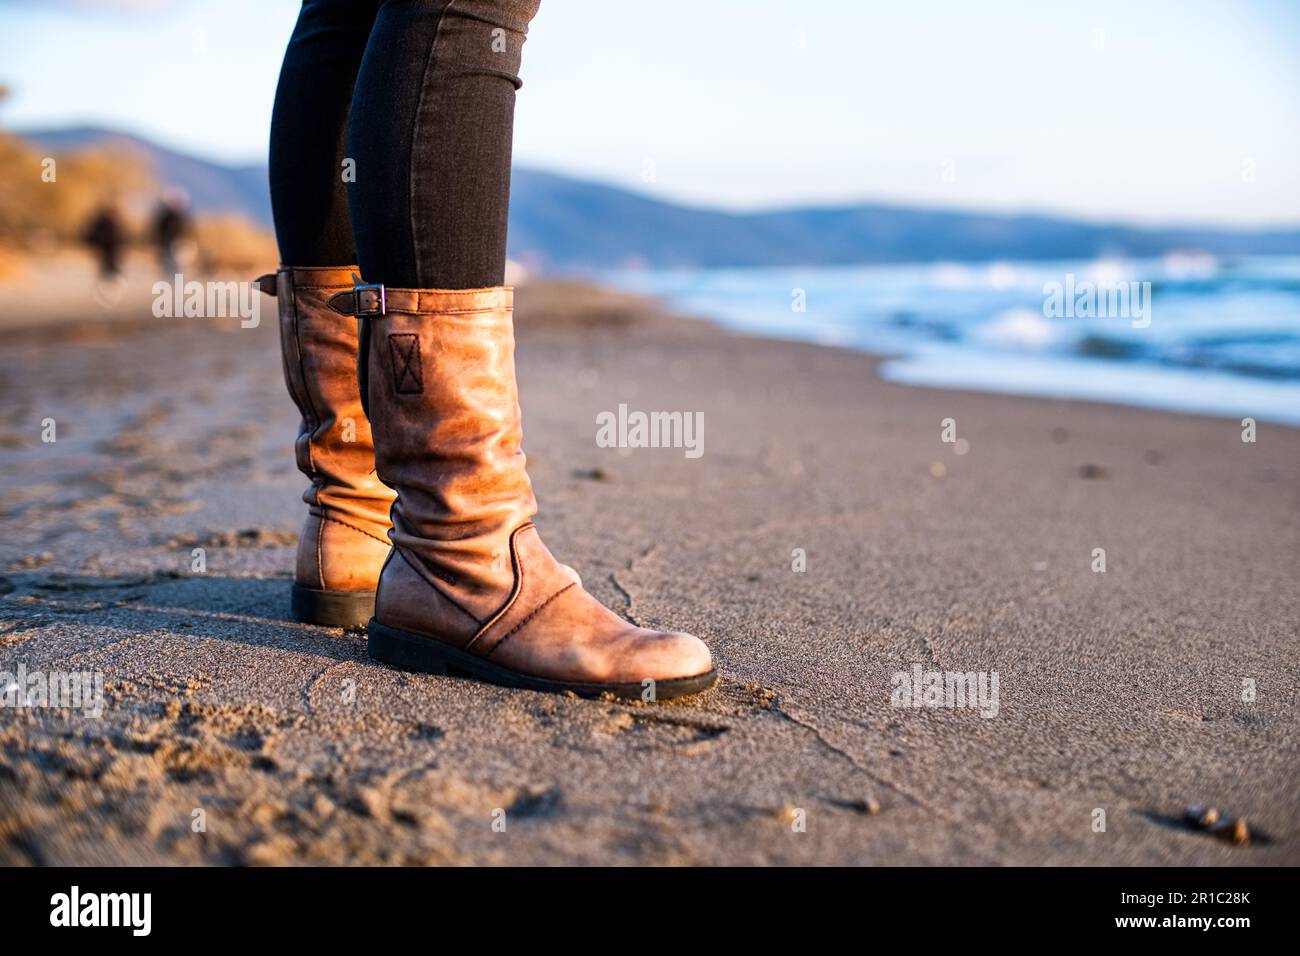 Sunset on the beach. A woman wearing orange leather boots, standing up on the beach sand. Mediterranean Sea in the foreground. Marina Di Grosseto. Stock Photo